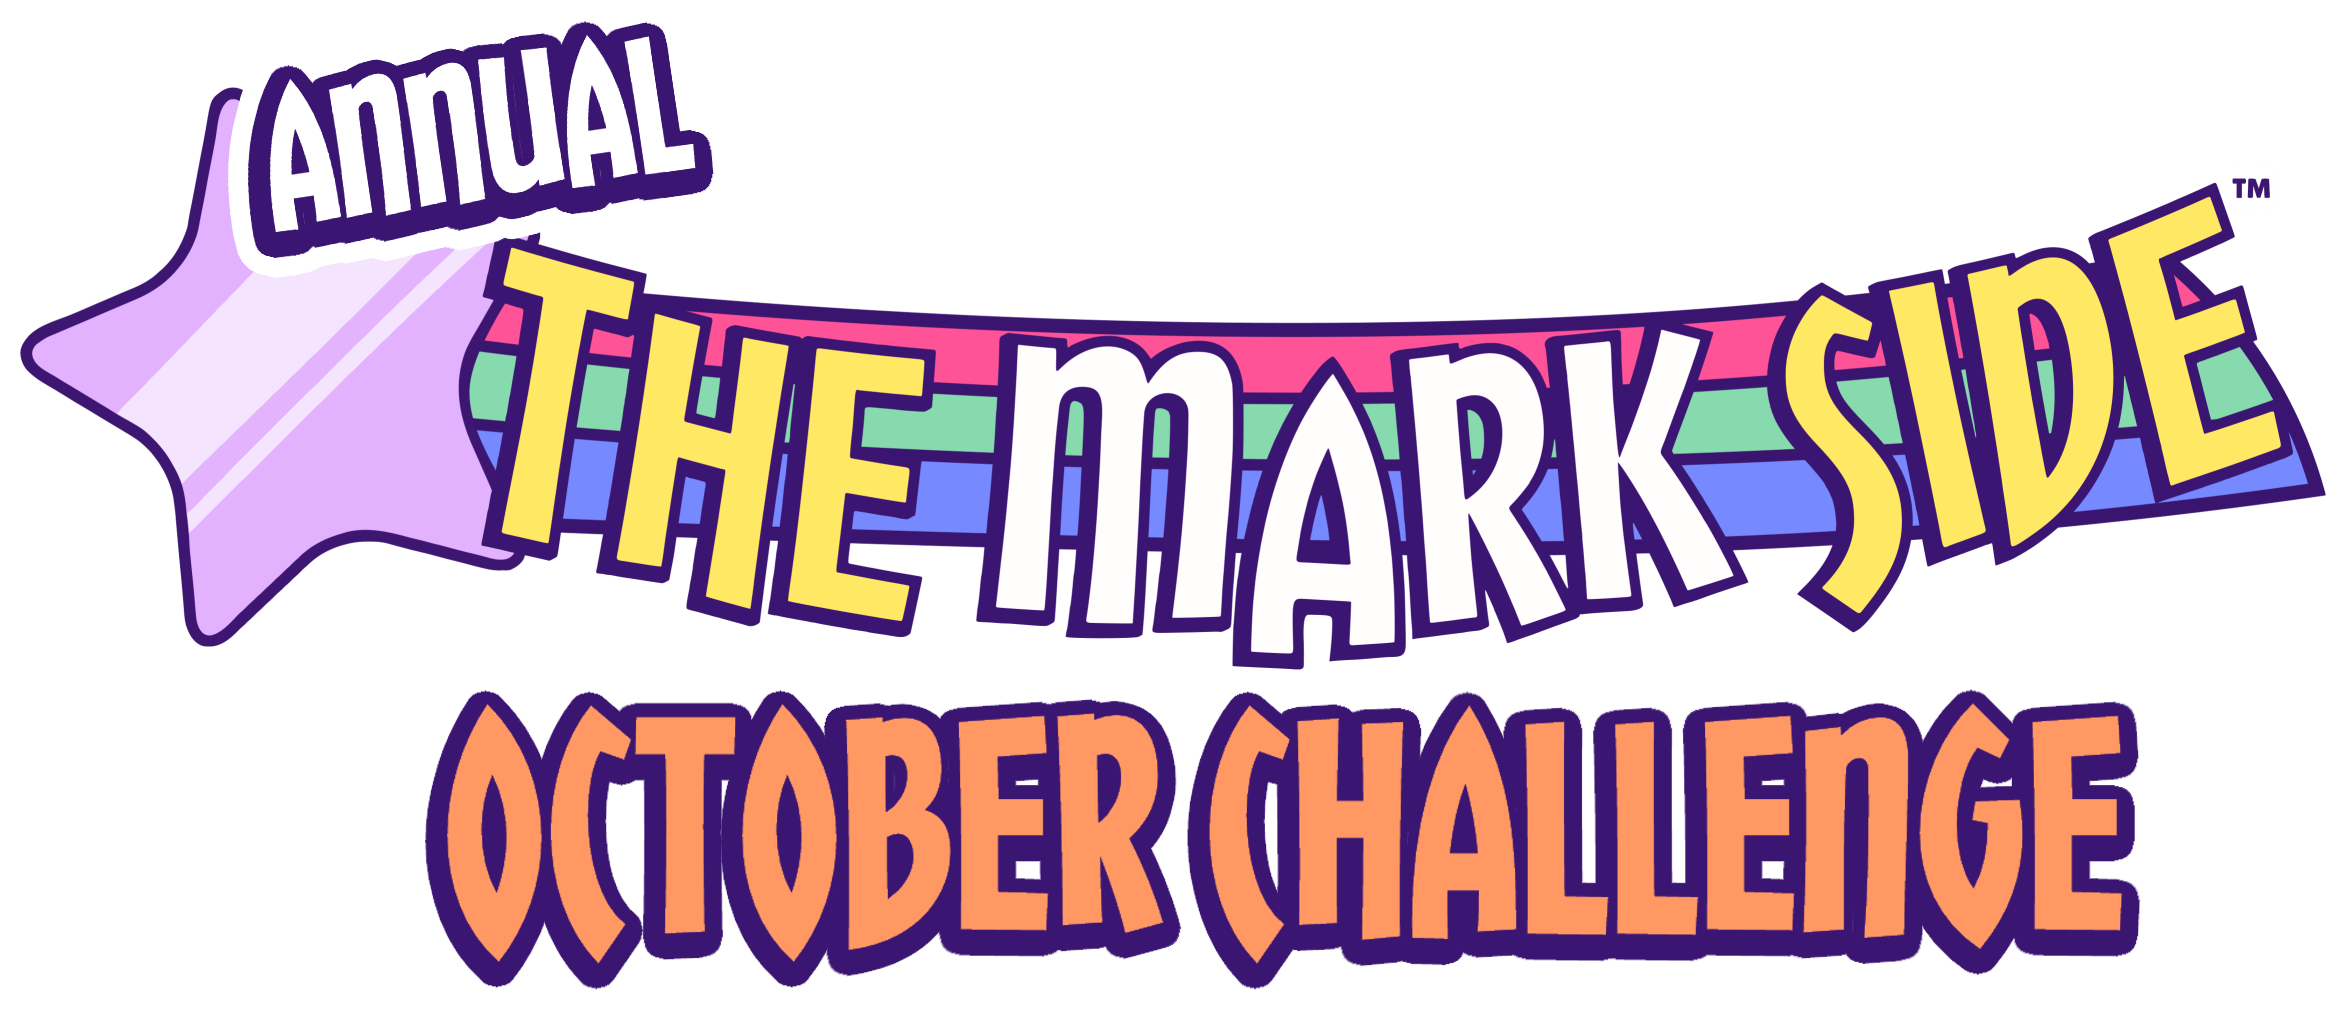 Annual The Mark Side October Challenge